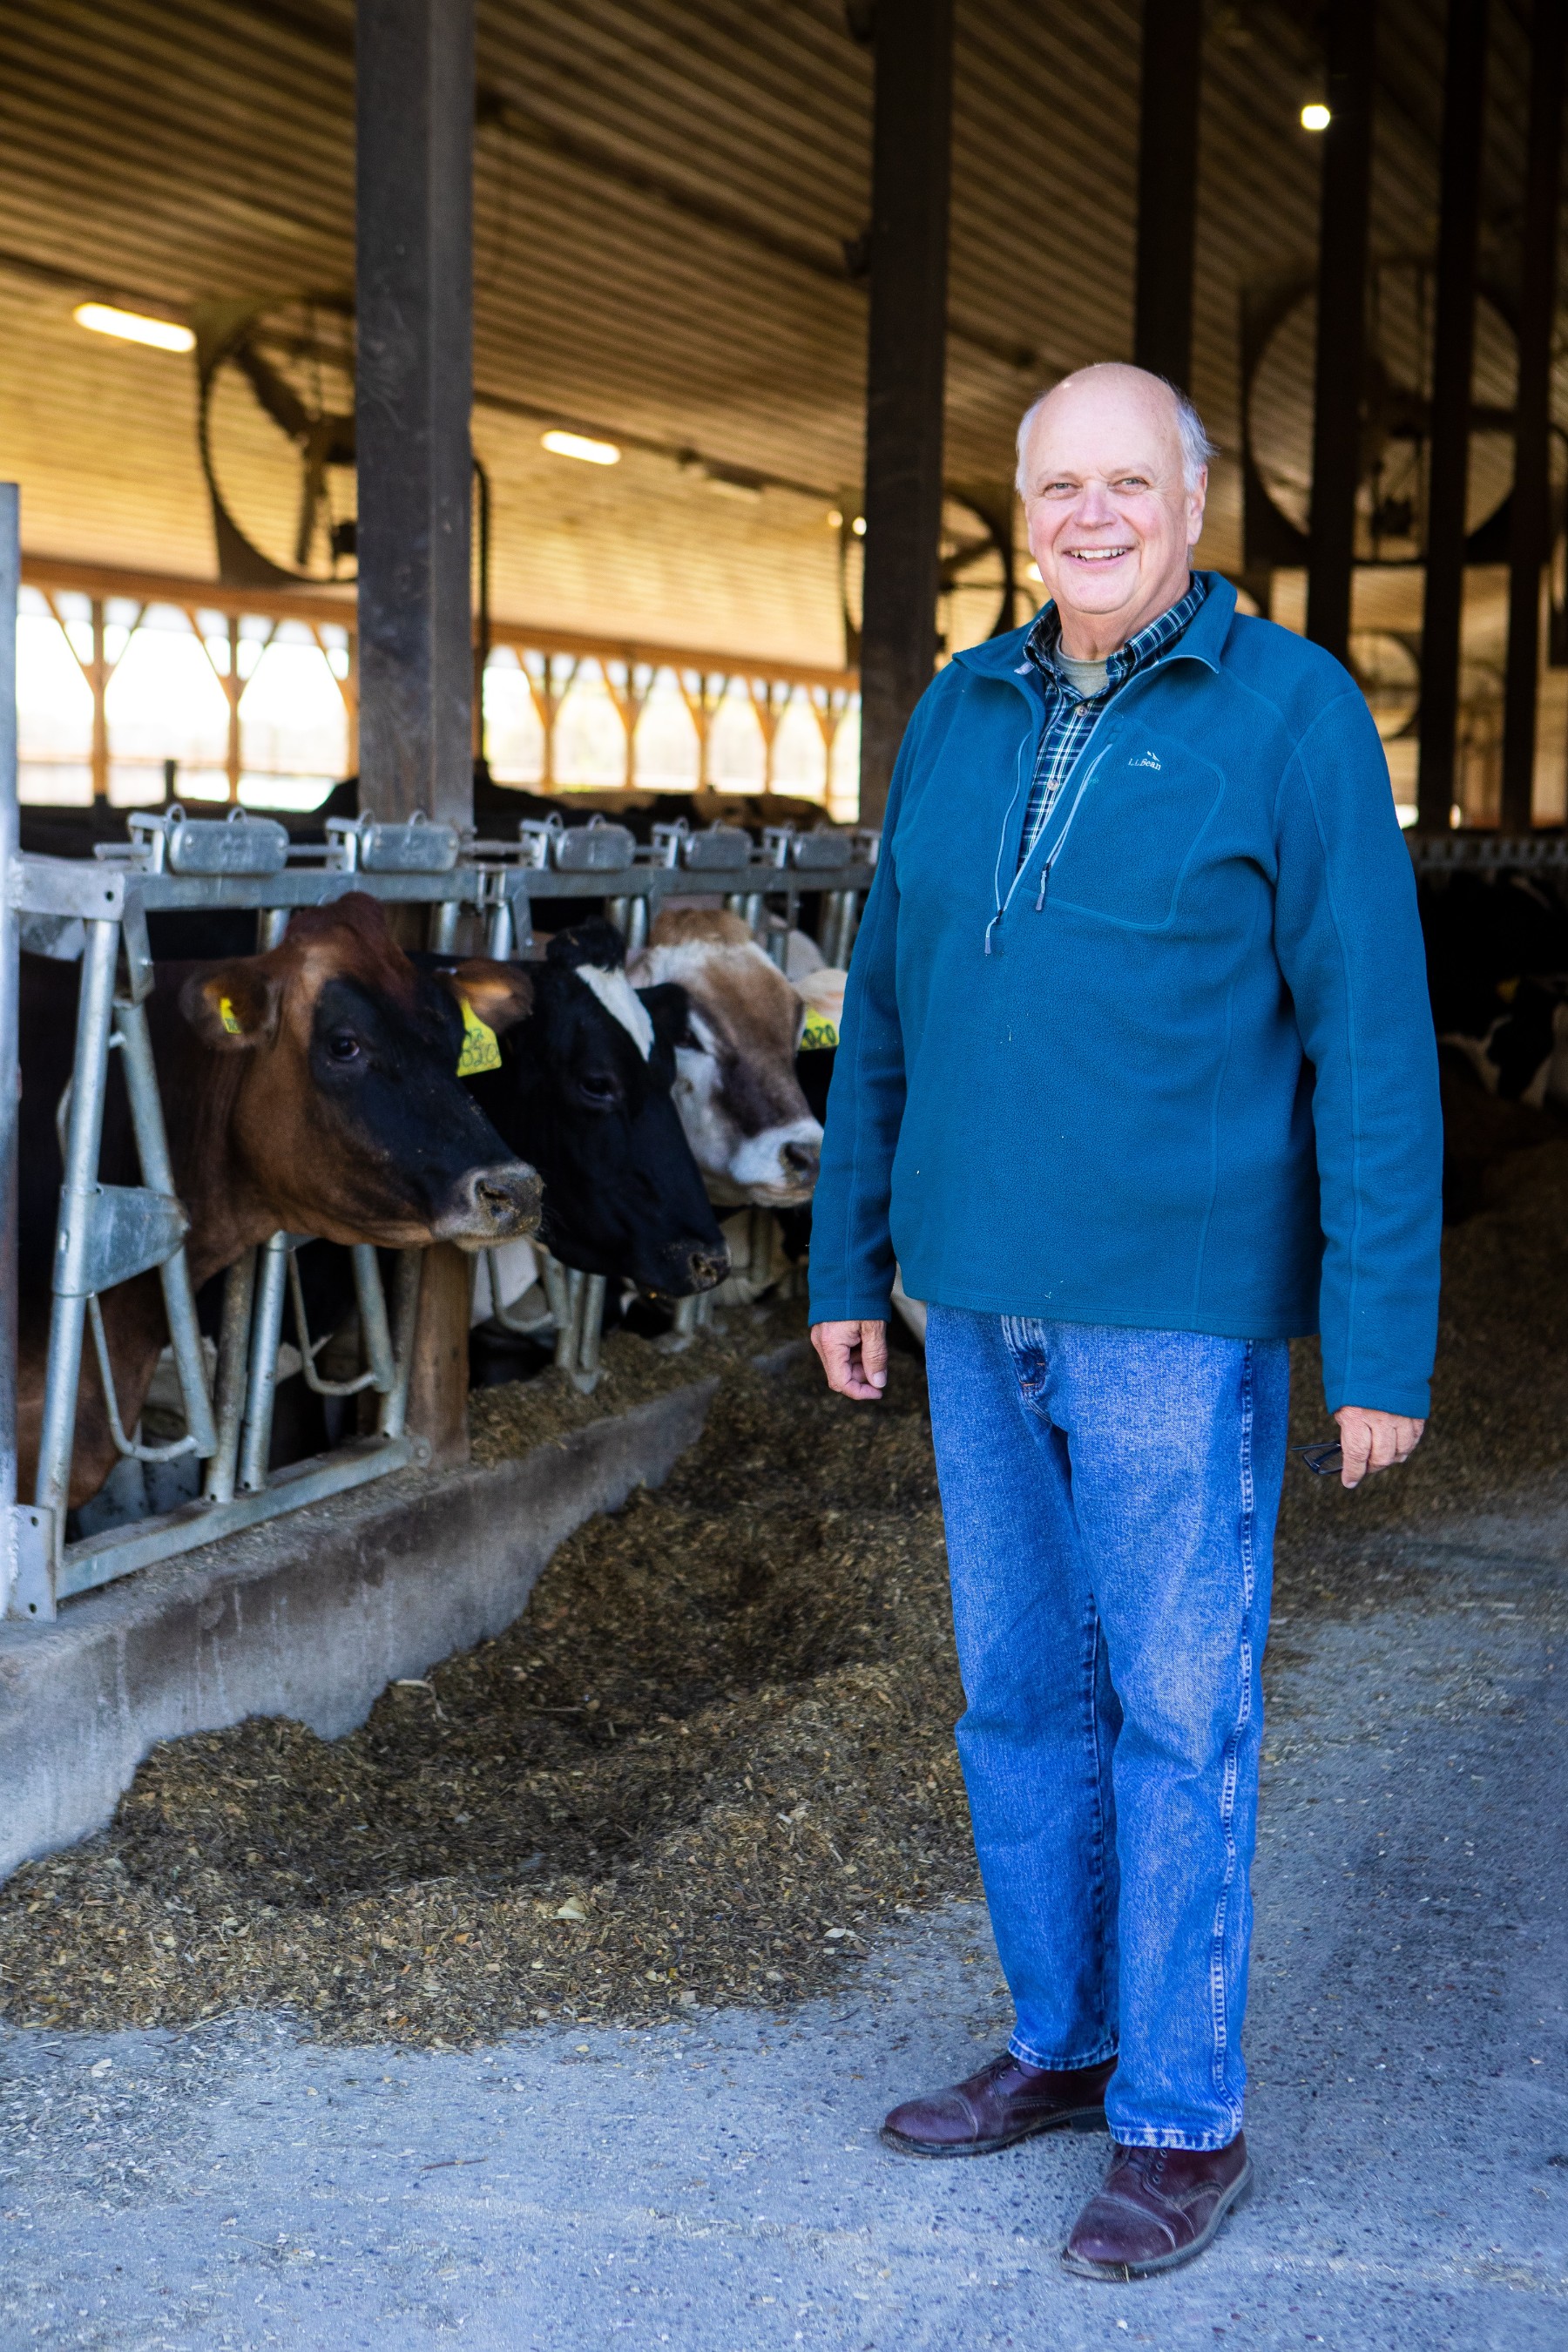 Tom Bellavance’s Sunset Lake Farm in Vermont will participate in Ben & Jerry’s pilot project to determine the best ways to cut greenhouse gas emissions on dairy farms.  Photo: Ben & Jerry’s